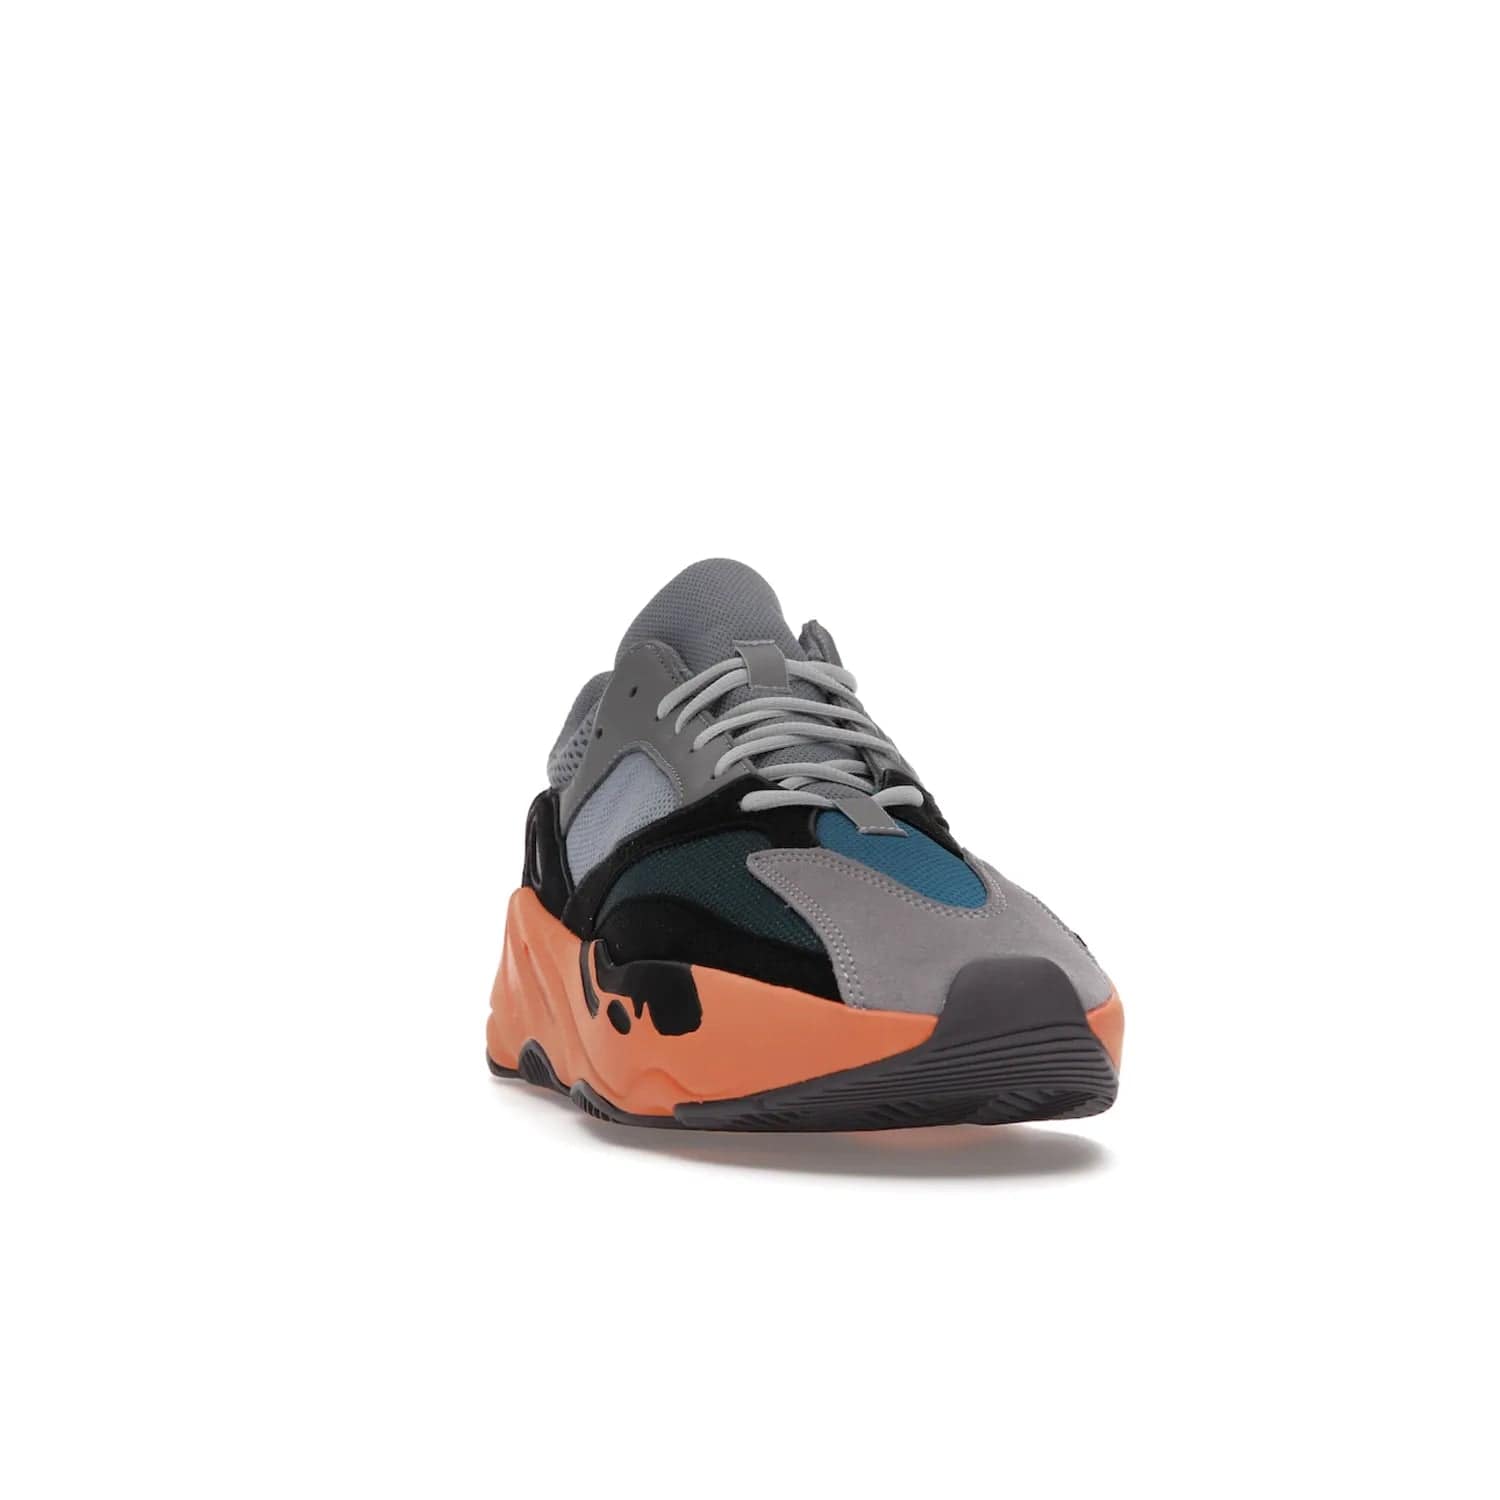 adidas Yeezy Boost 700 Wash Orange - Image 8 - Only at www.BallersClubKickz.com - Introducing the adidas Yeezy Boost 700 Wash Orange. Unique grey leather, suede, mesh upper and teal panels with a chunky Wash Orange Boost midsole. Release October 2021, make a statement today!